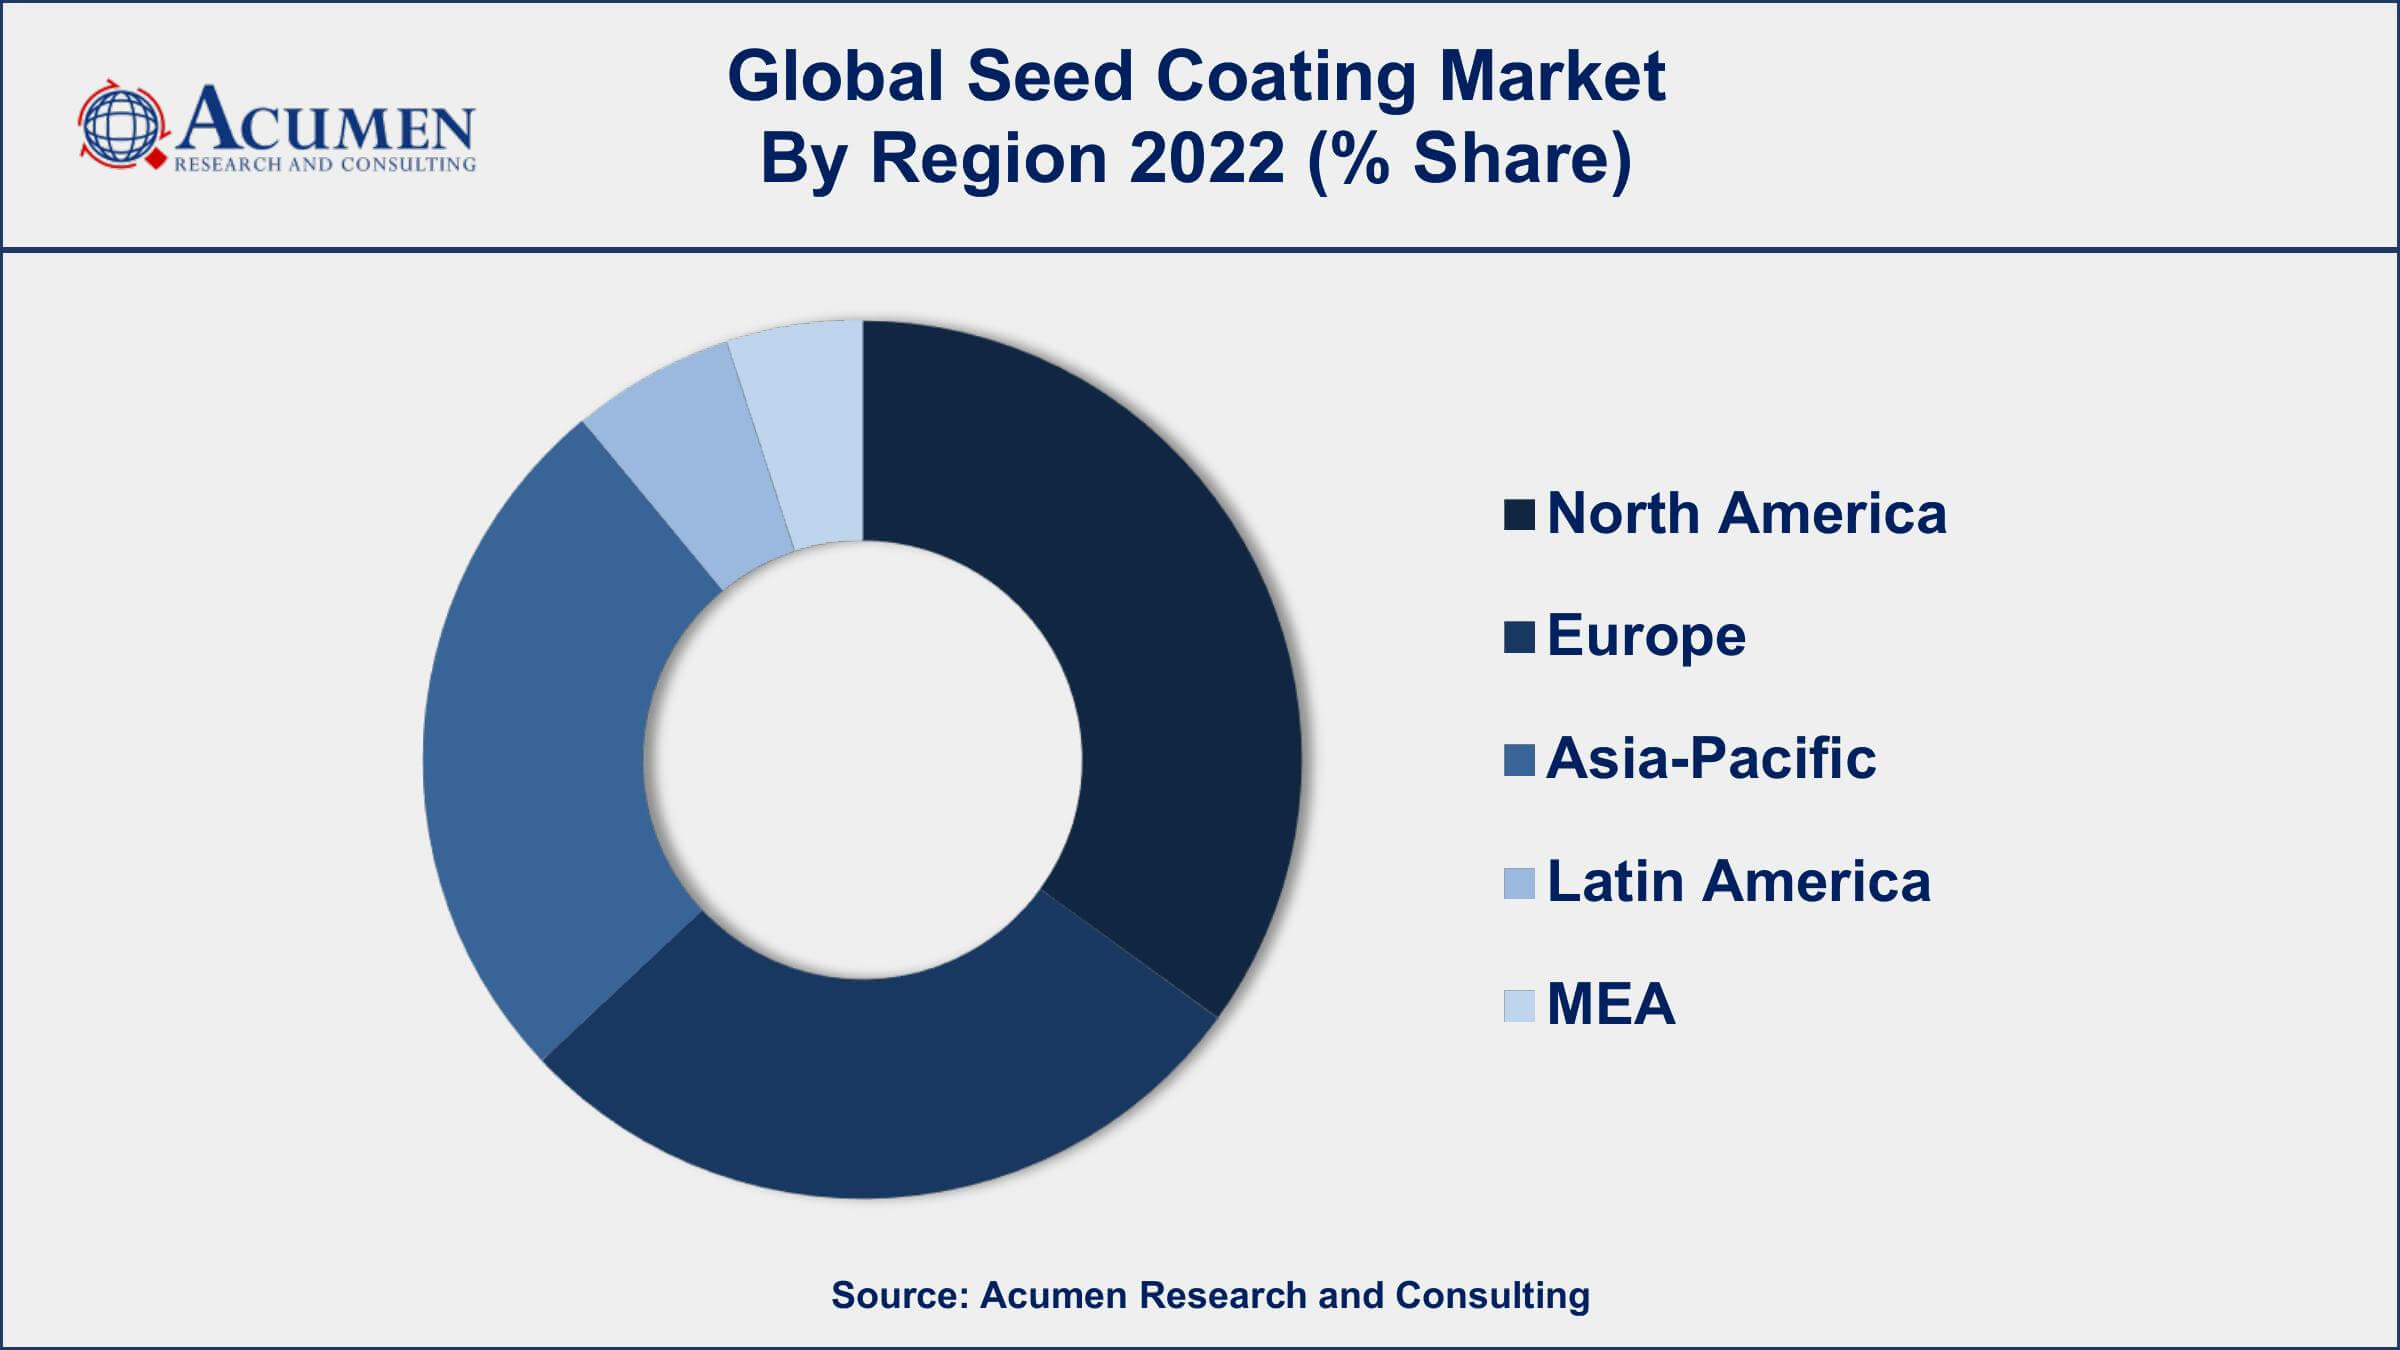 Seed Coating Market Drivers